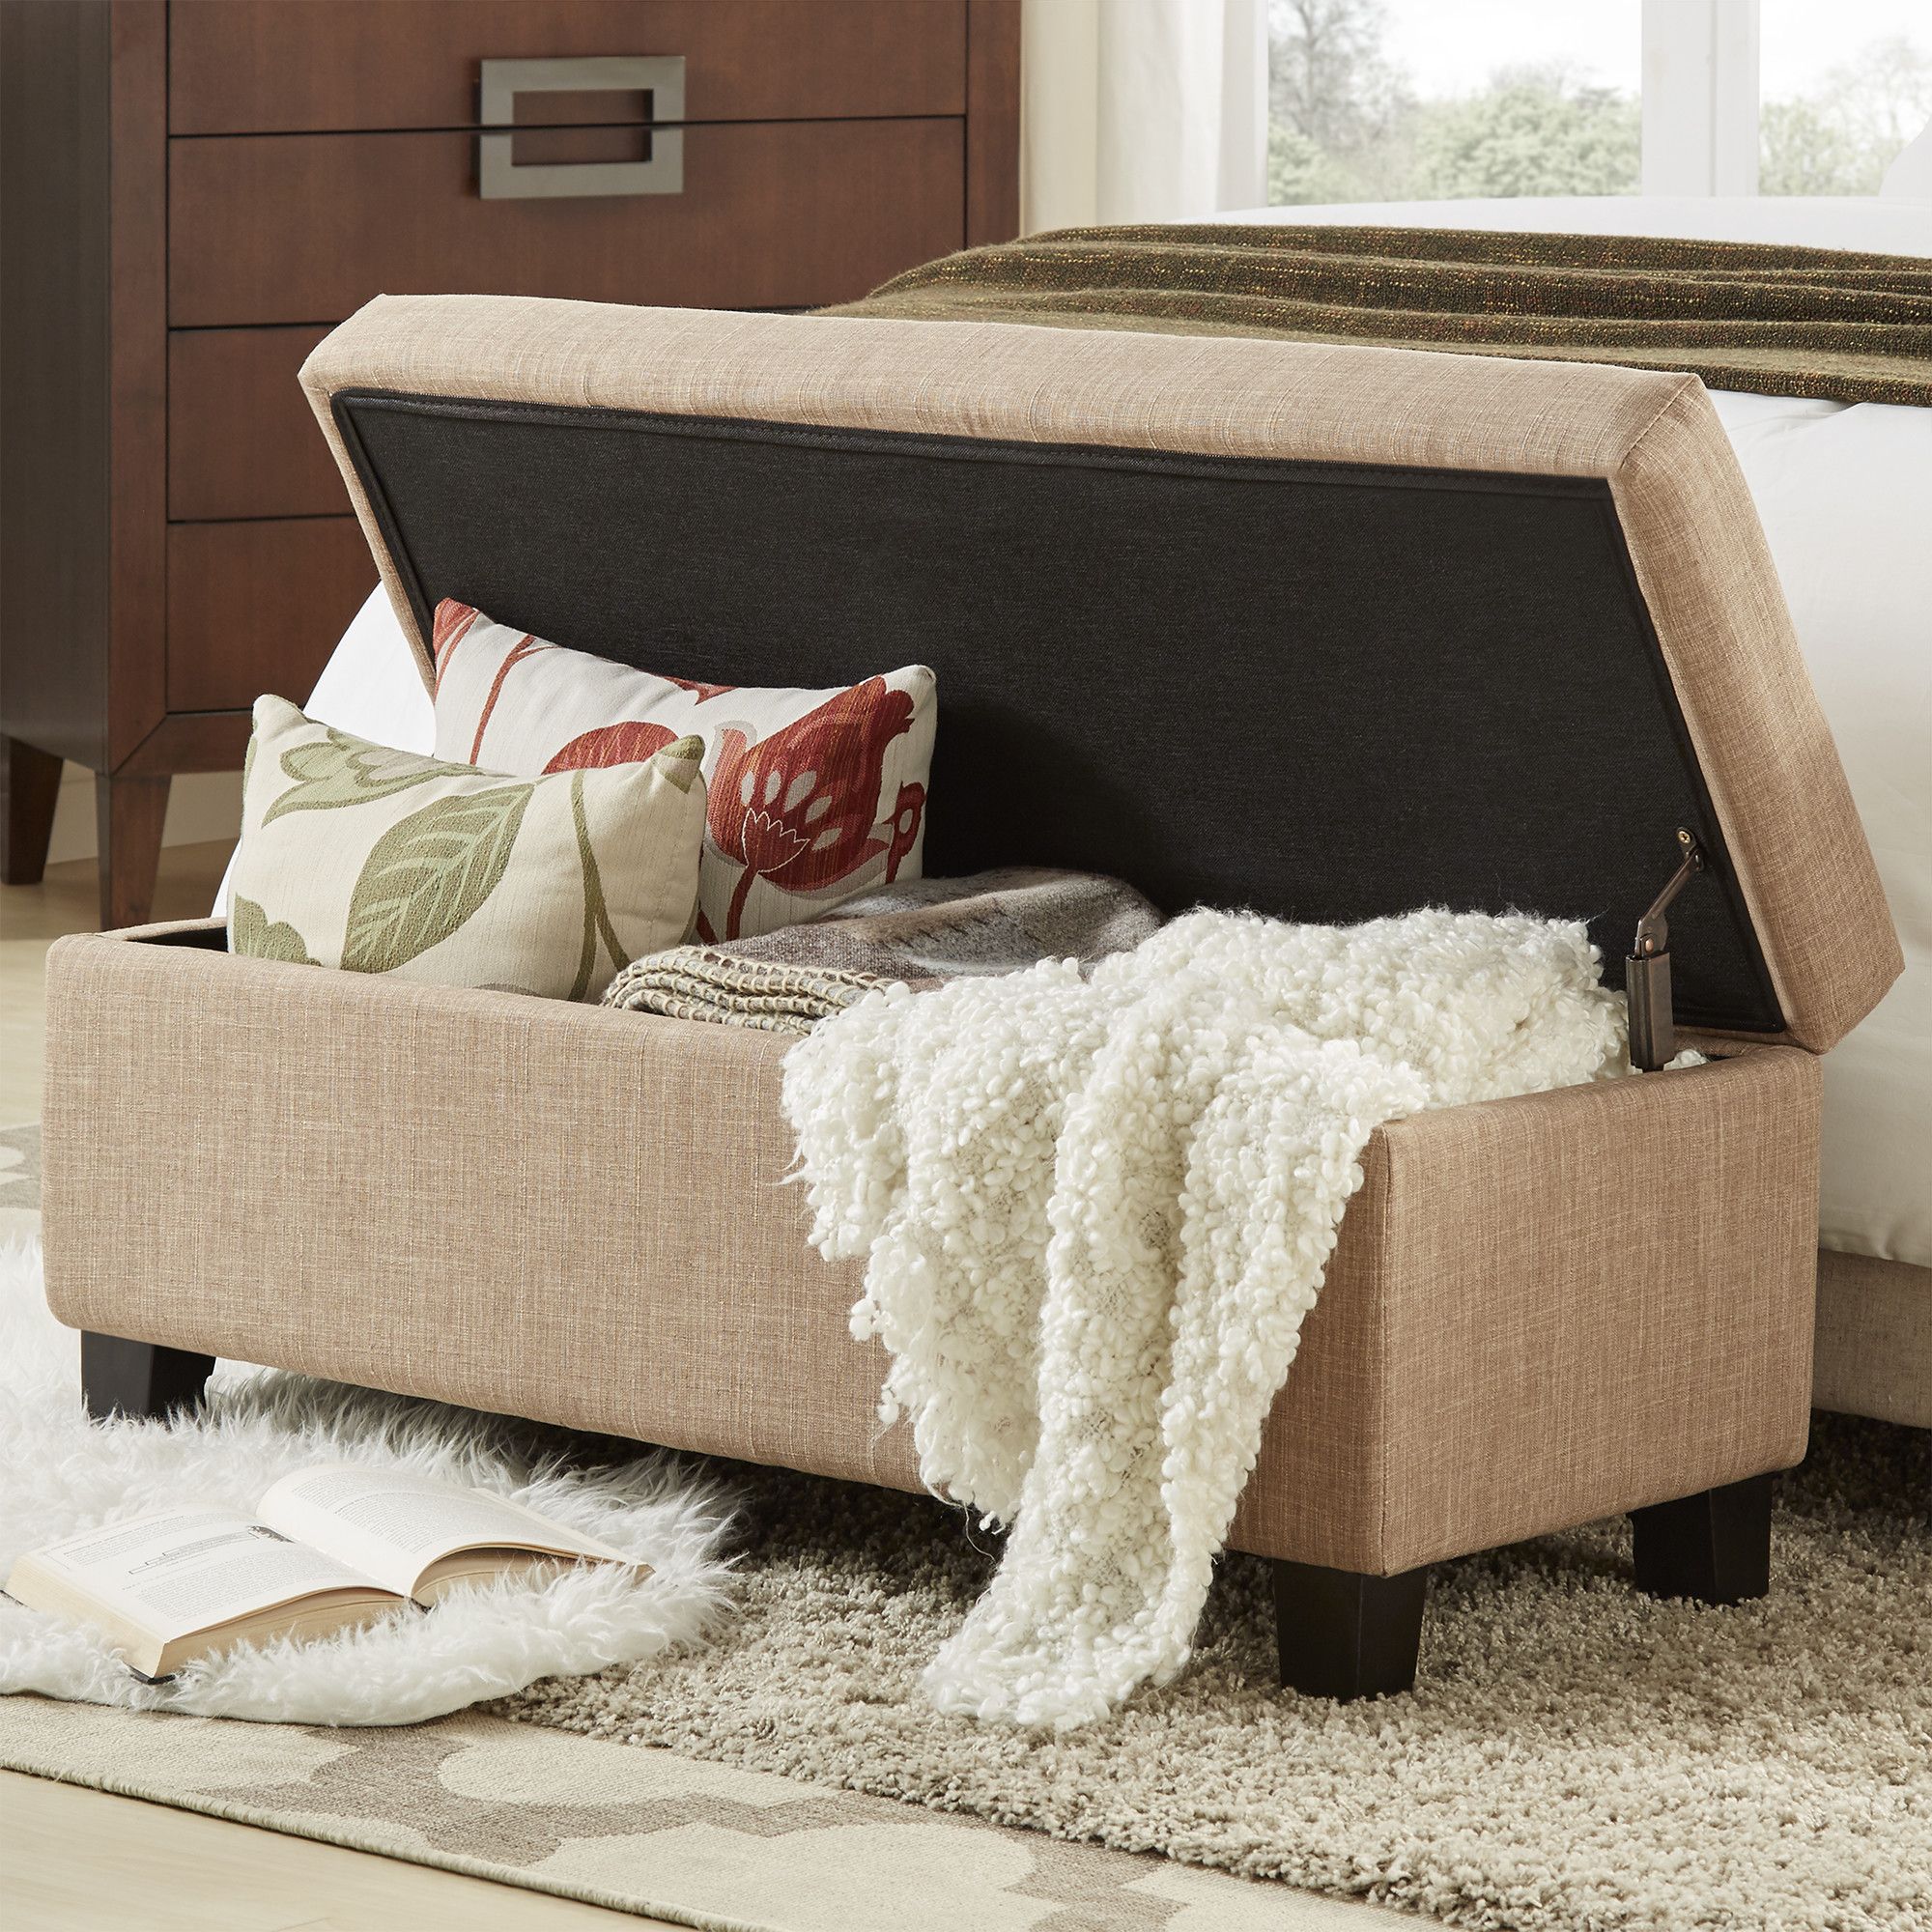 The Ultimate Guide To Buying A Bedroom Storage Bench